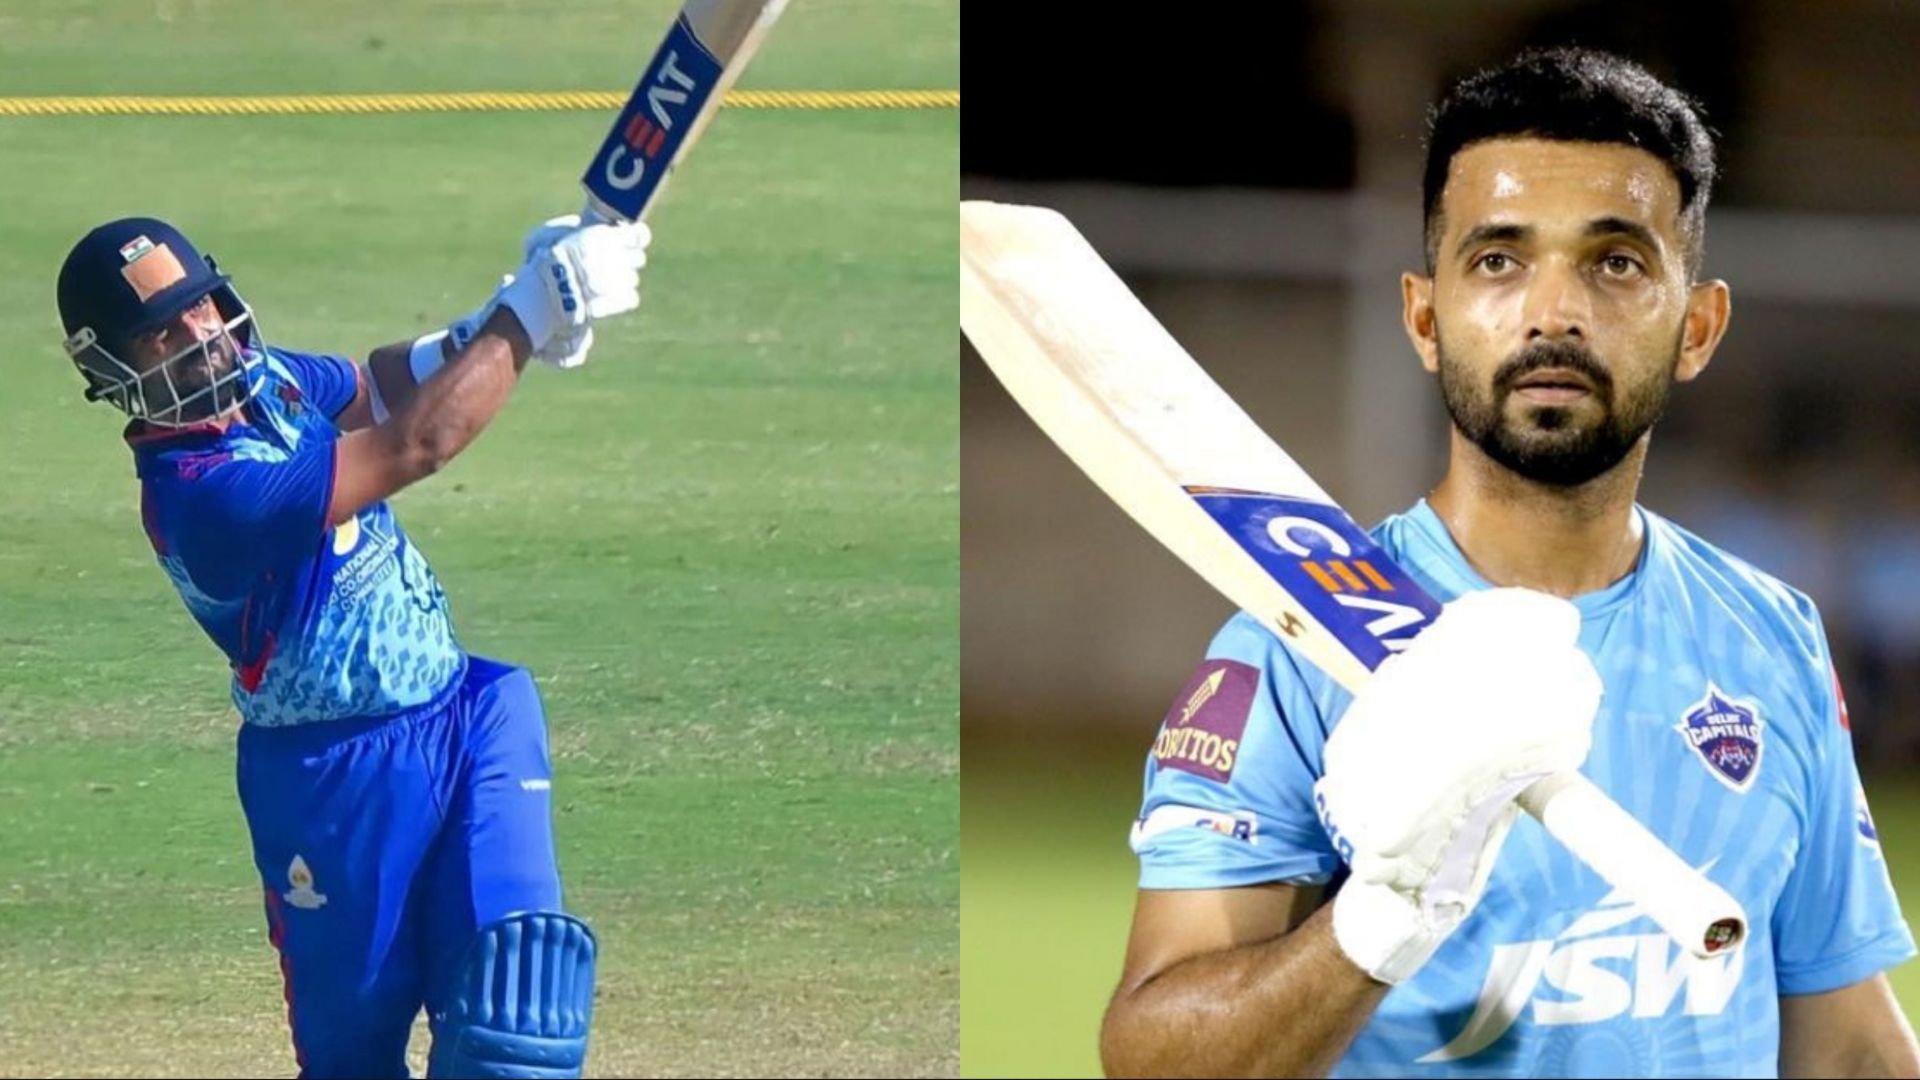 Ajinkya Rahane could be one of the top picks at the IPL 2022 Auction